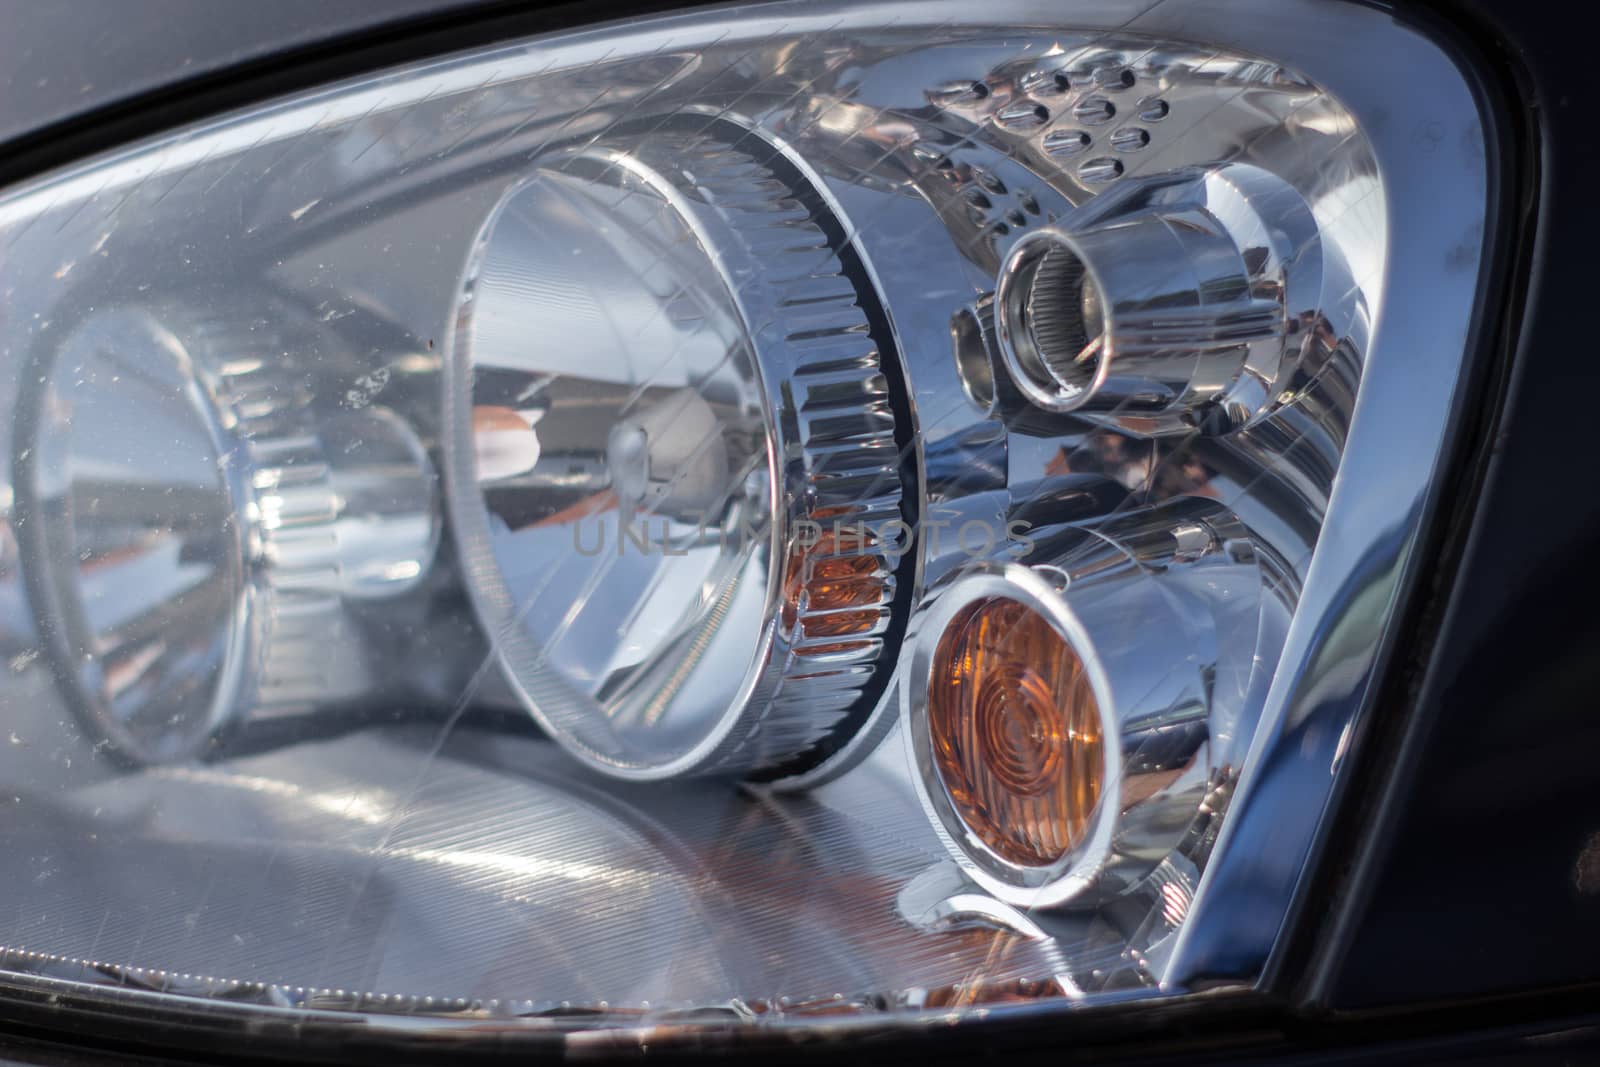 Right front headlight of the car.